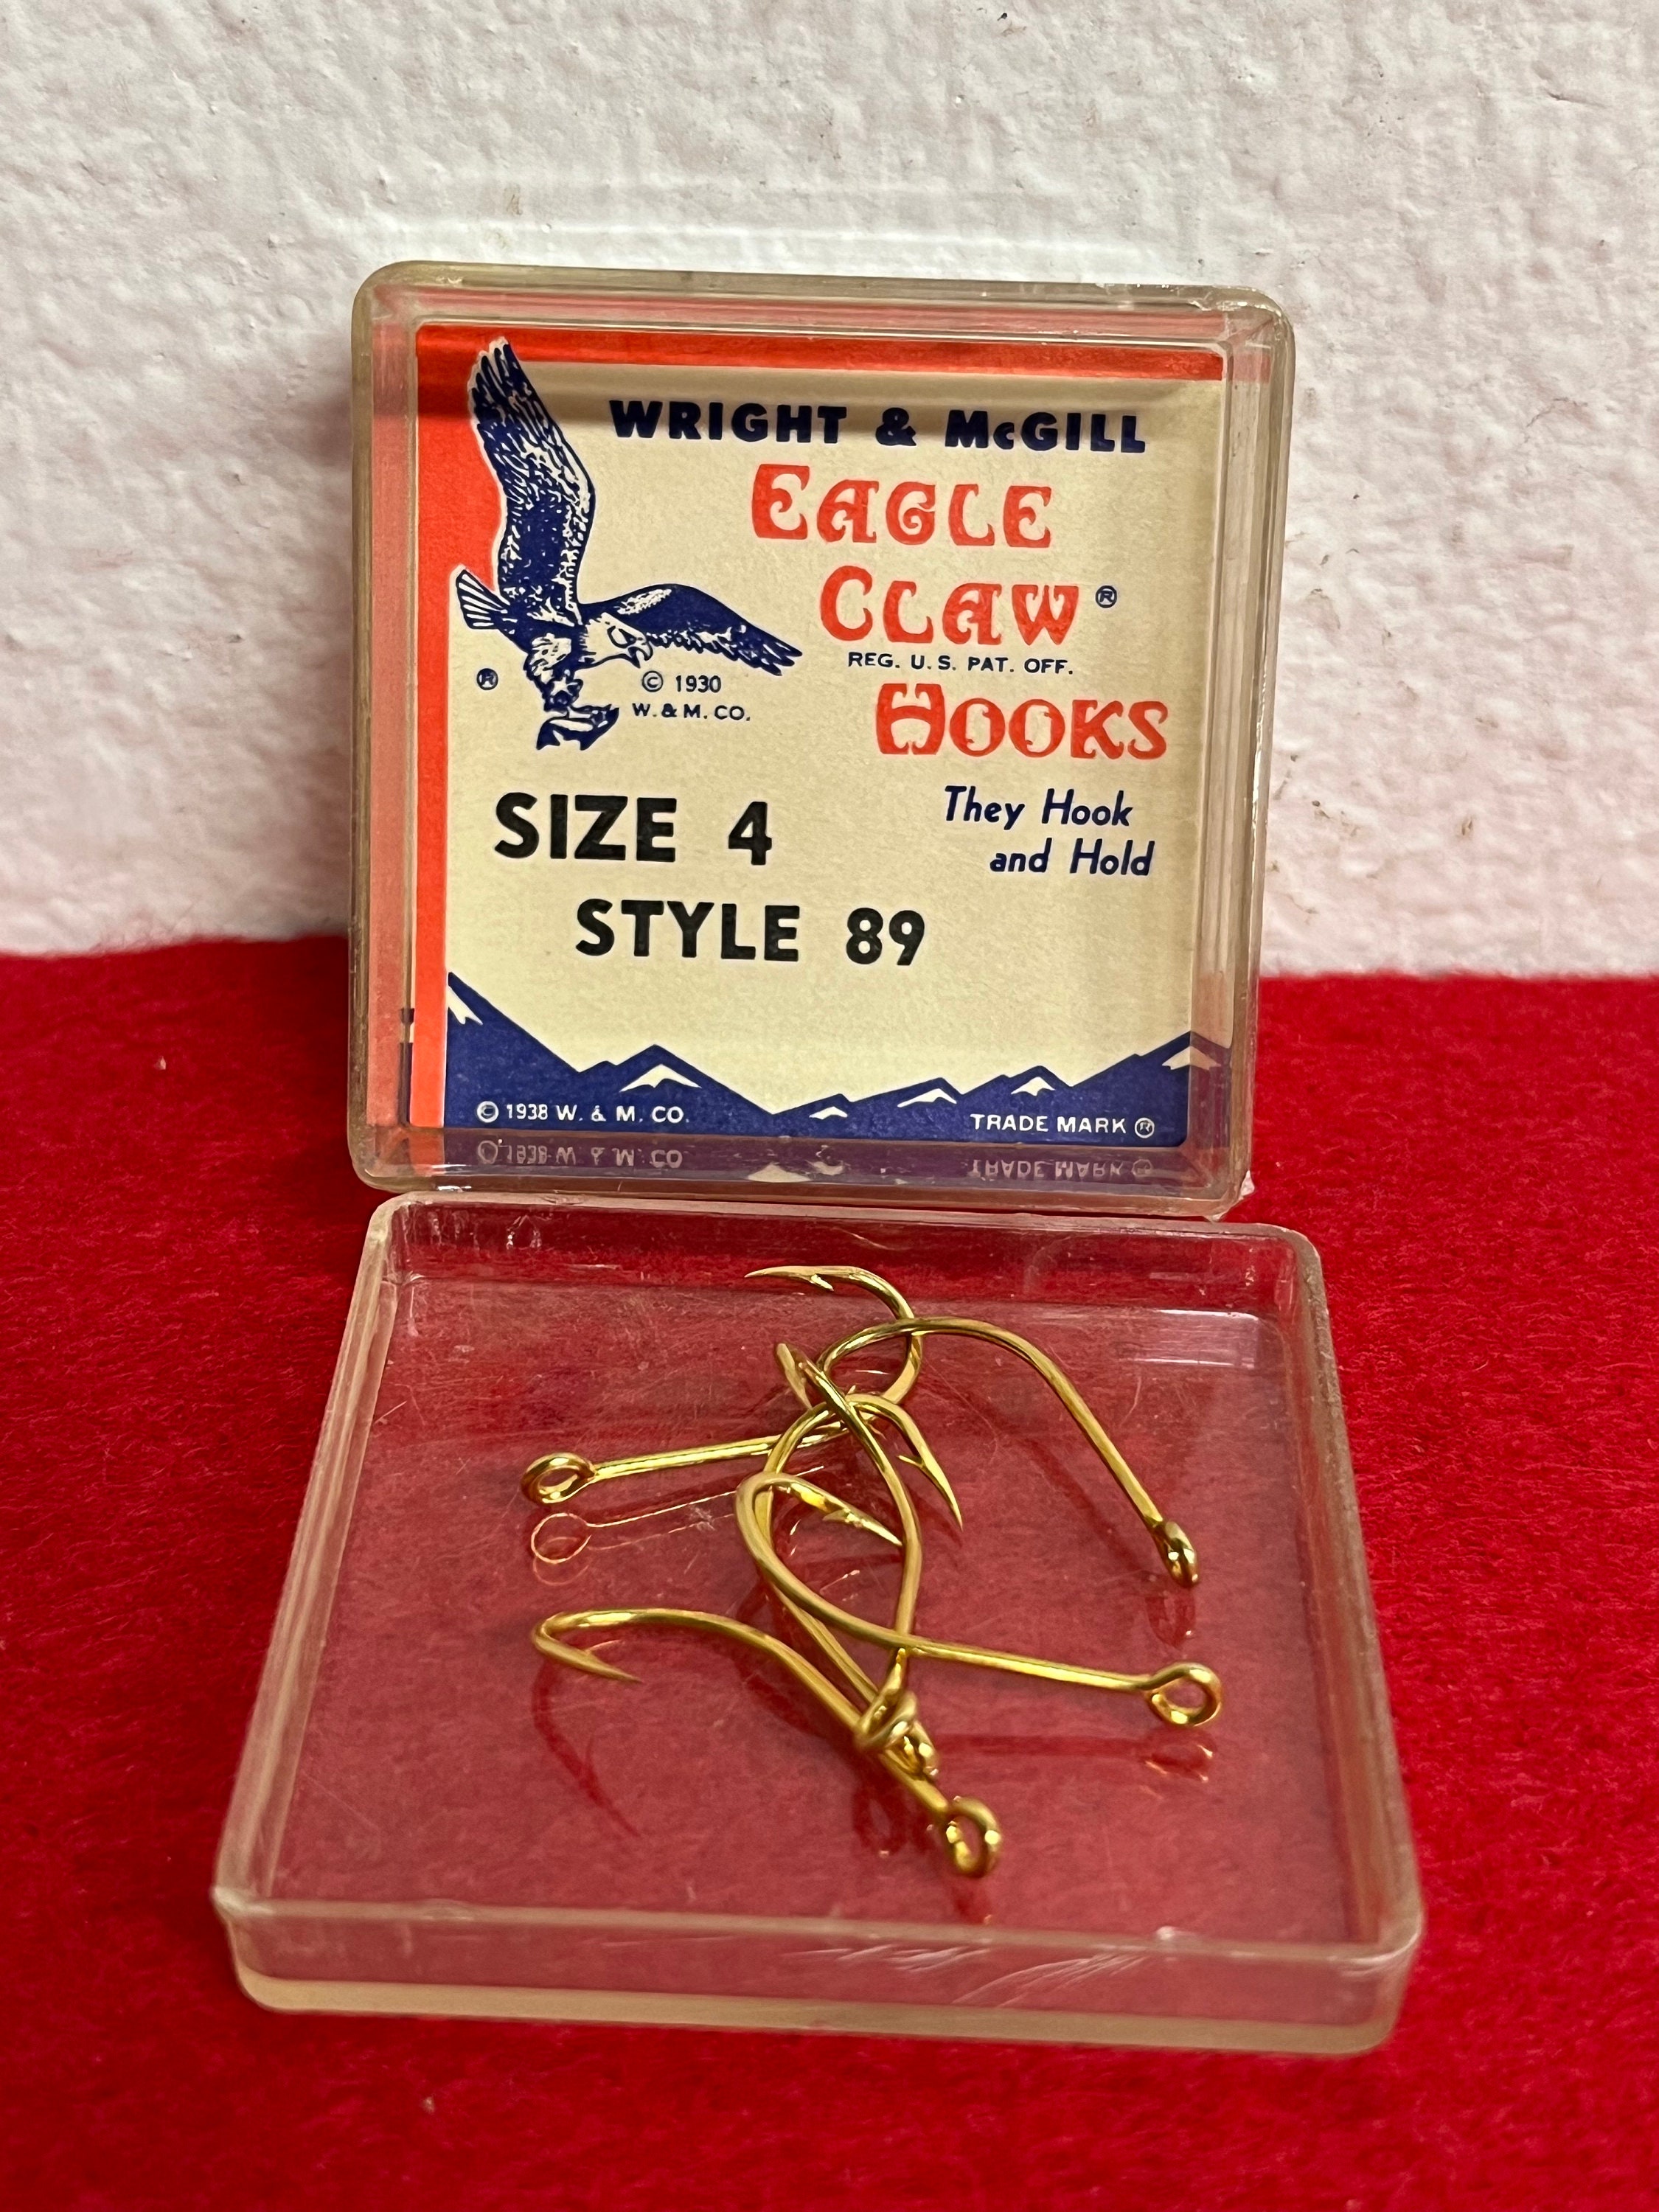 Vintage TIN SIGN Eagle Claw Hooks Fishing Advertising SIgn, Wright & McGill